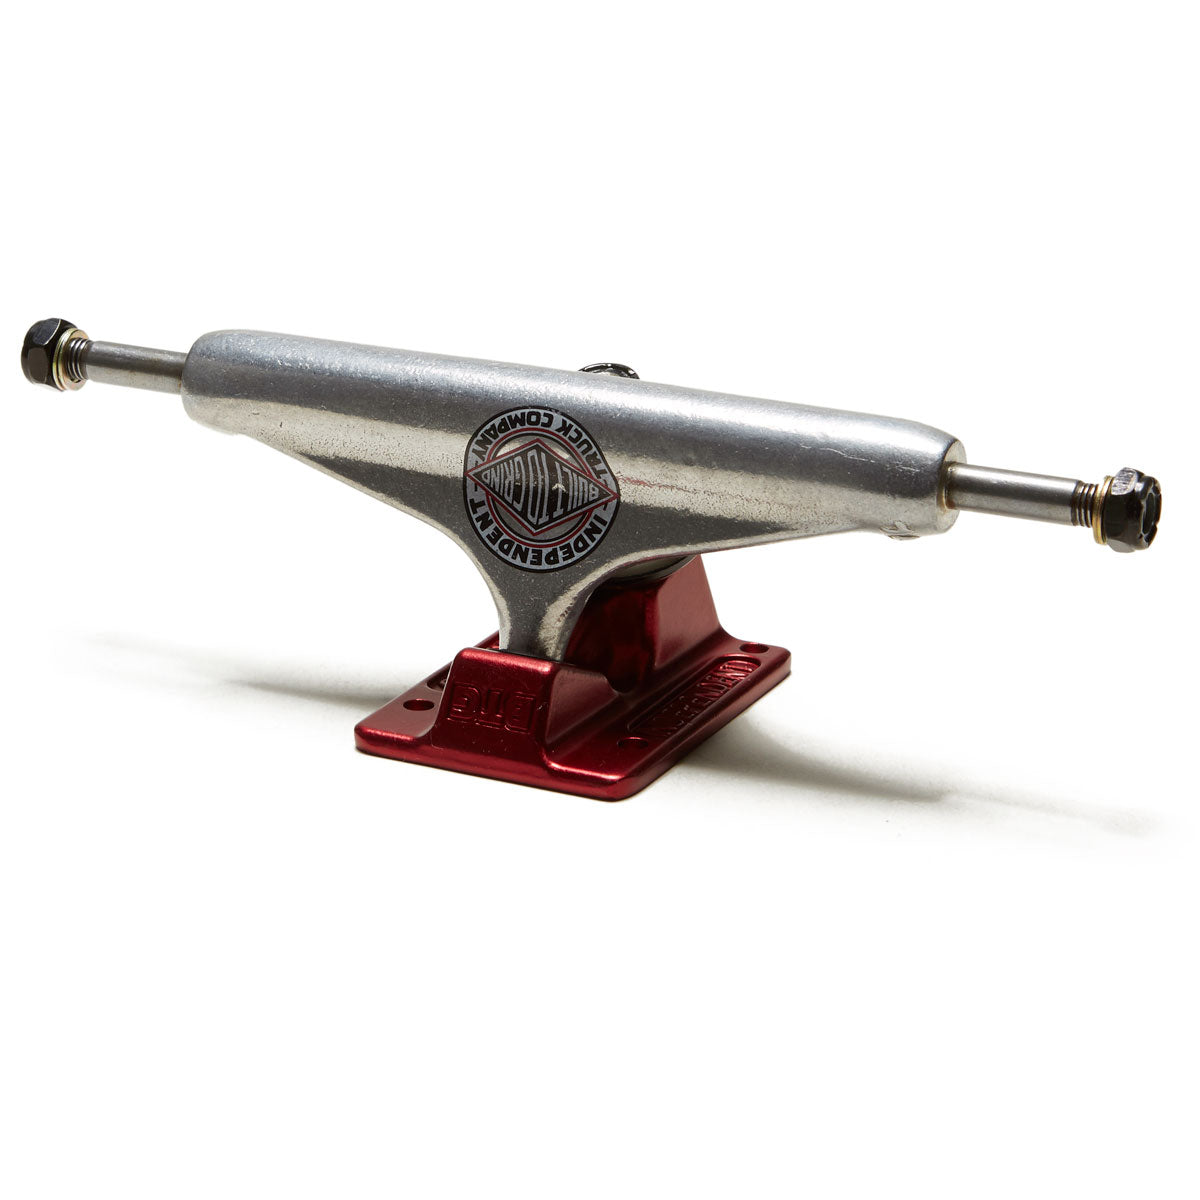 Independent Stage 11 Forged Hollow BTG Summit Standard Skateboard Trucks - Silver/Ano Red - 149mm image 1